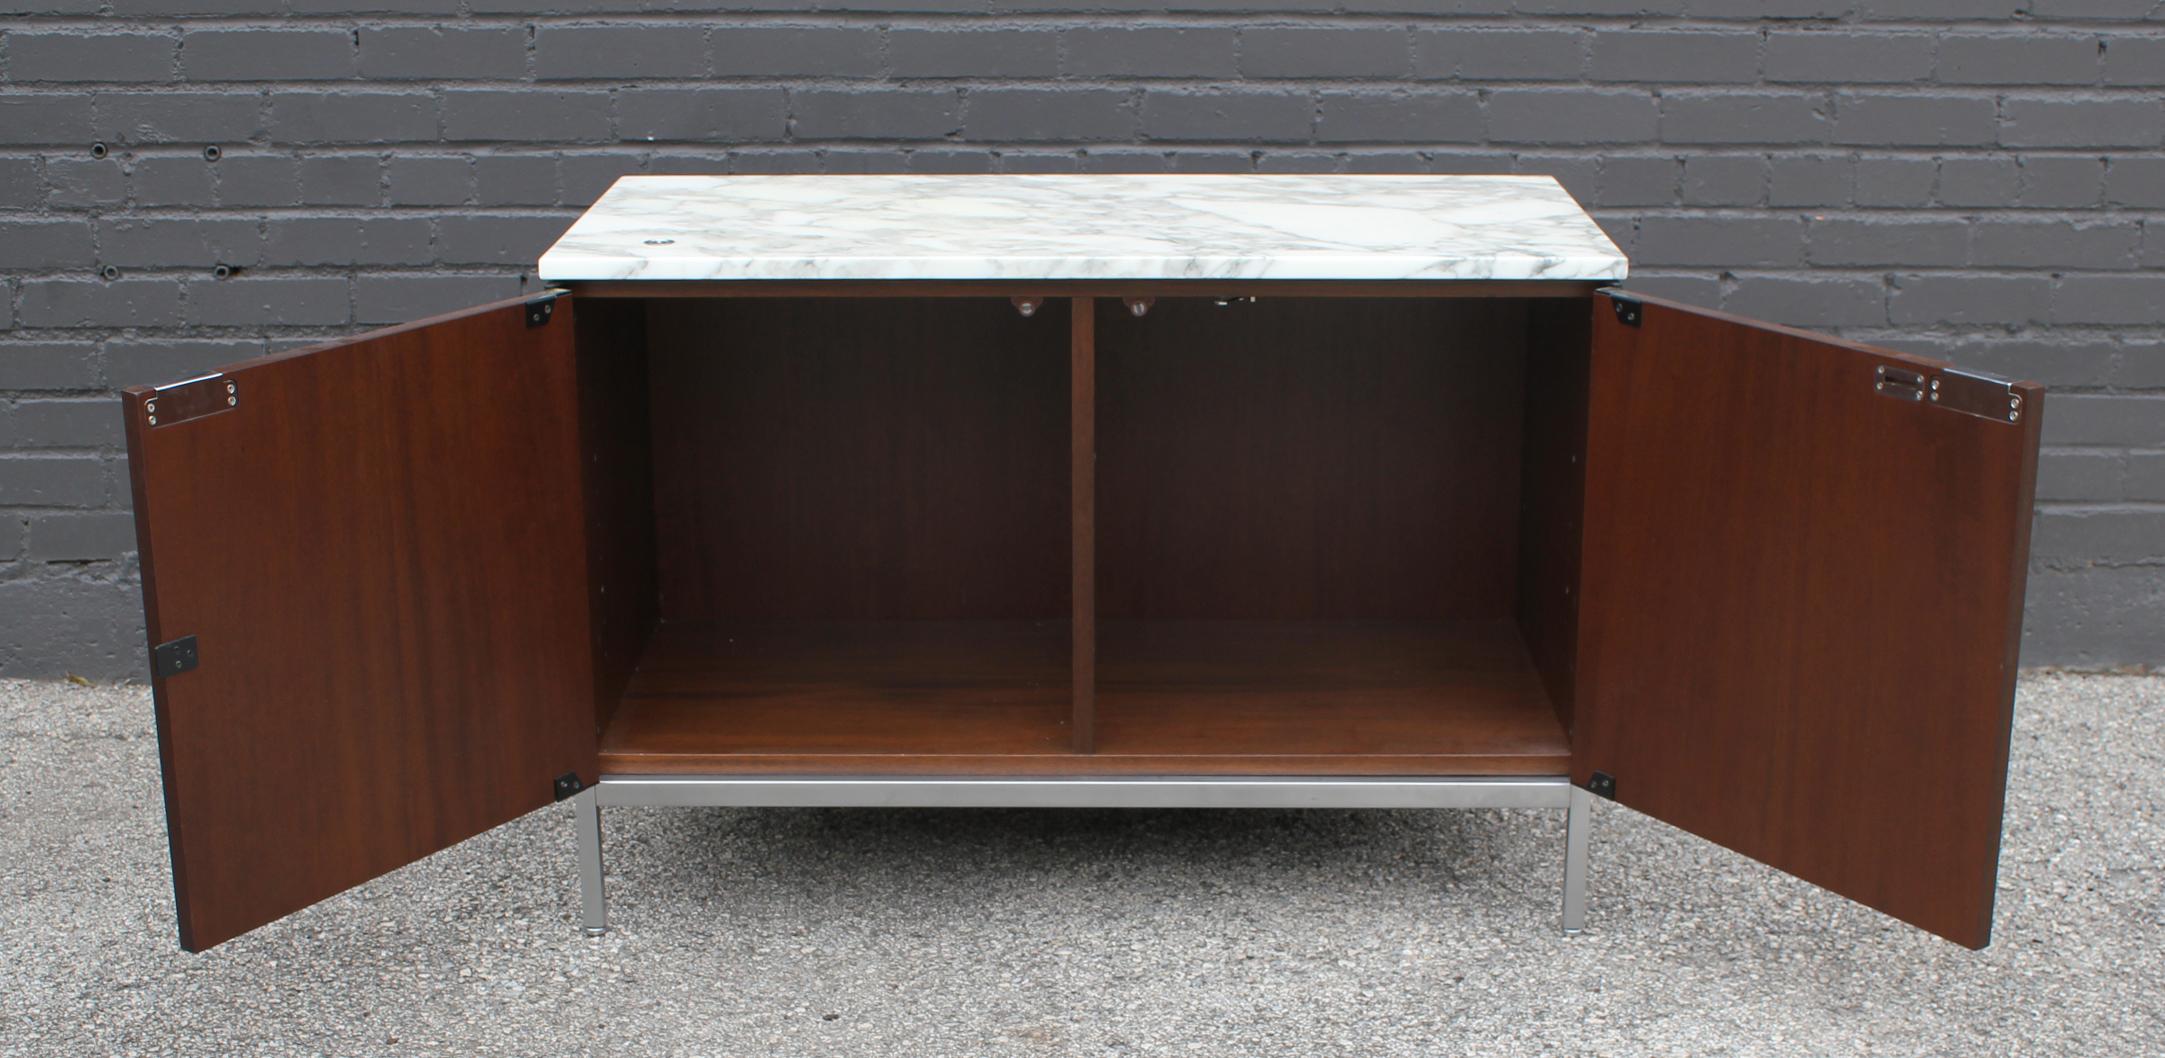 Contemporary Knoll Marble Top Credenza in Walnut and Calacatta Designed by Florence Knoll